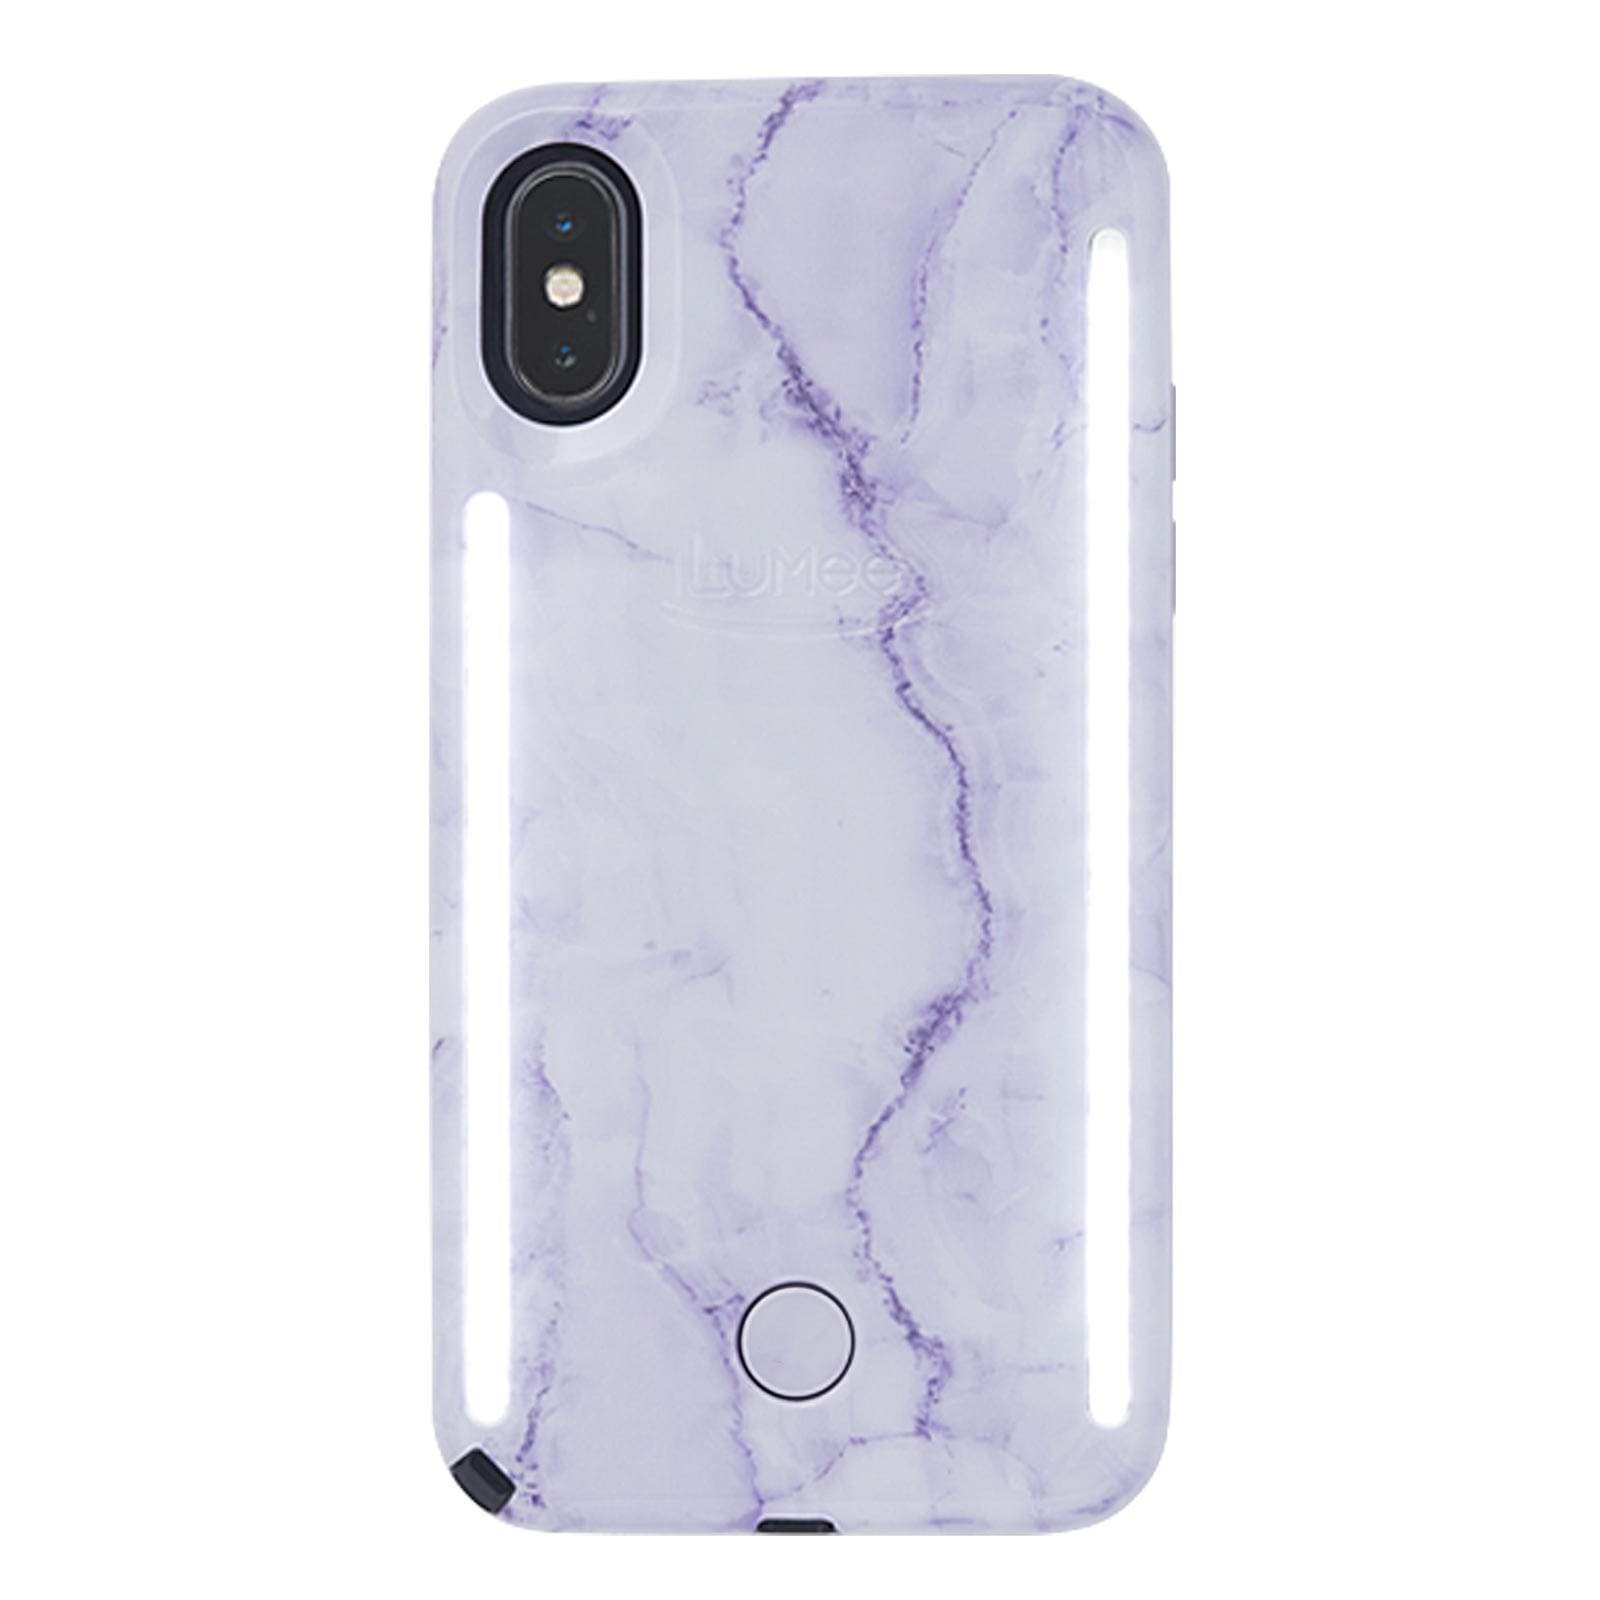 LuMee Duo iPhone X Case color::Lavender Marble